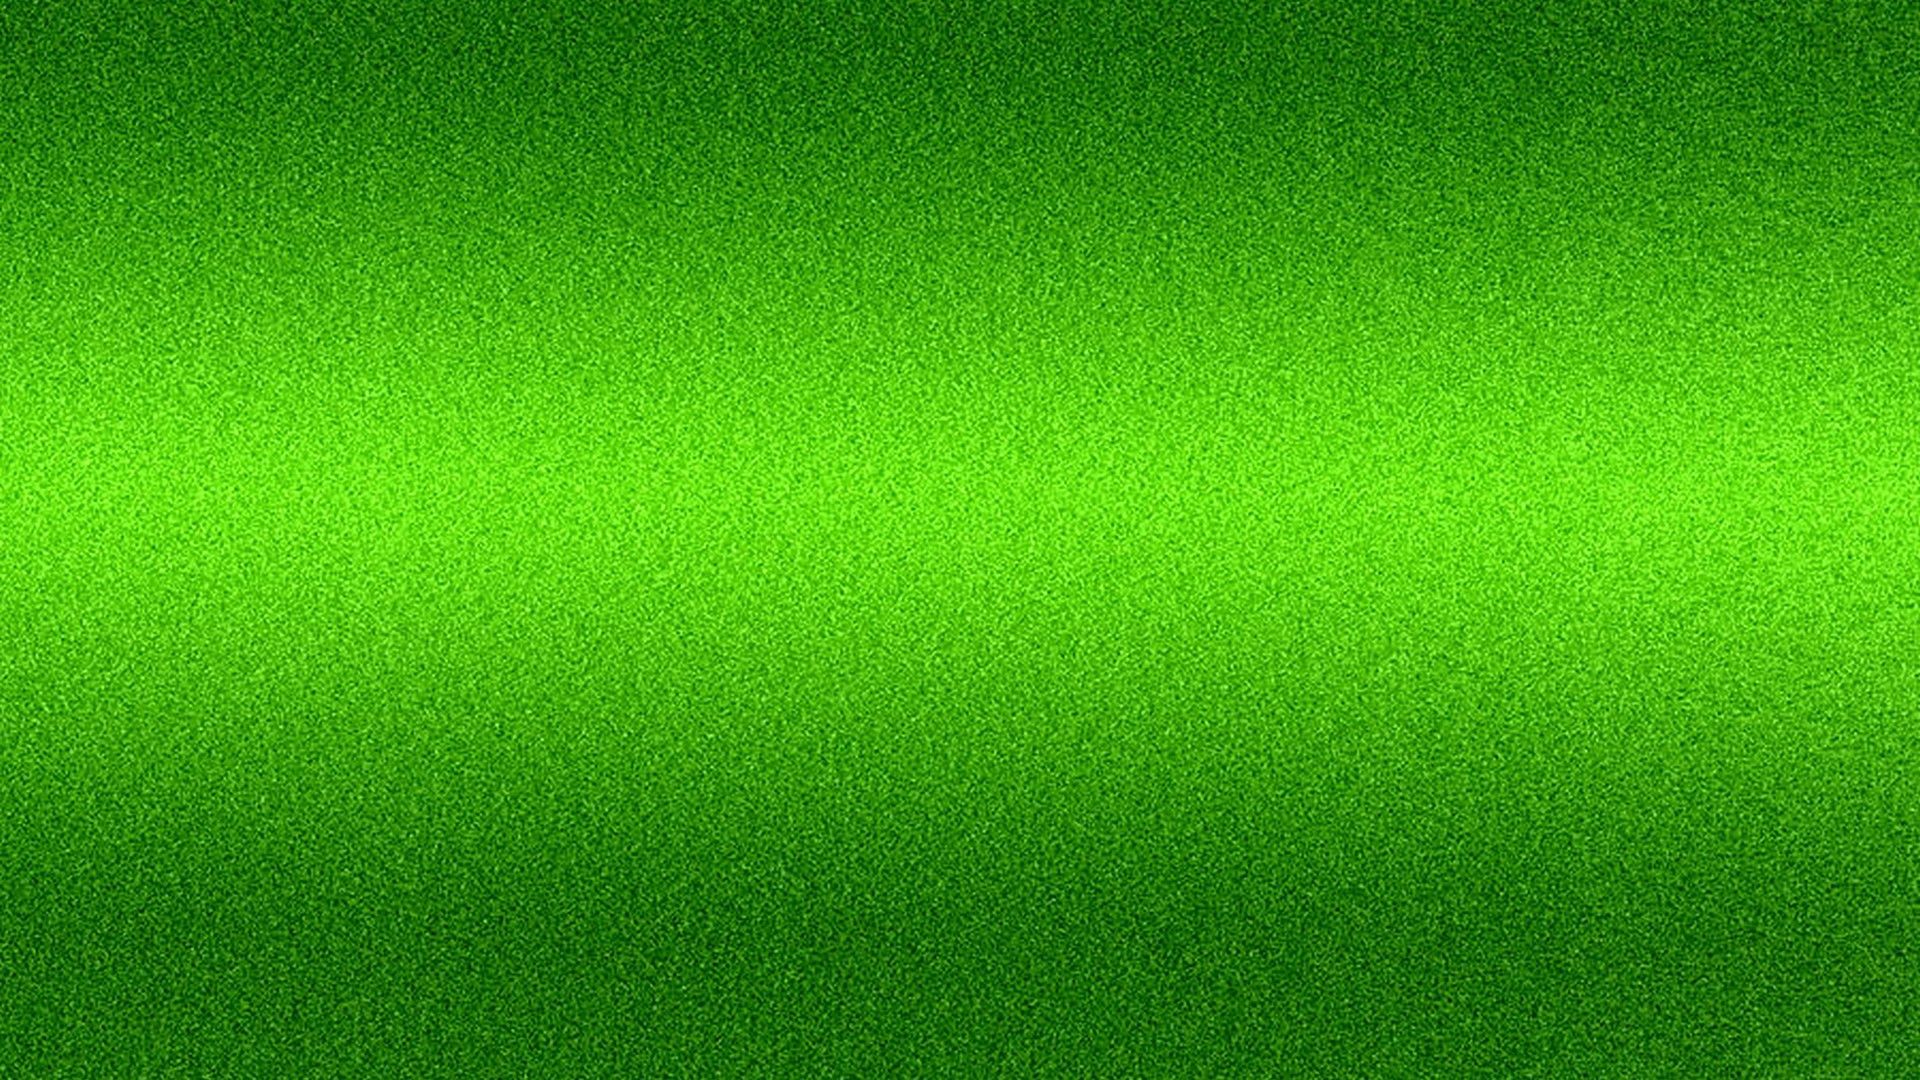 Moss Green - #8A9A5B - The Official Register of Color Names